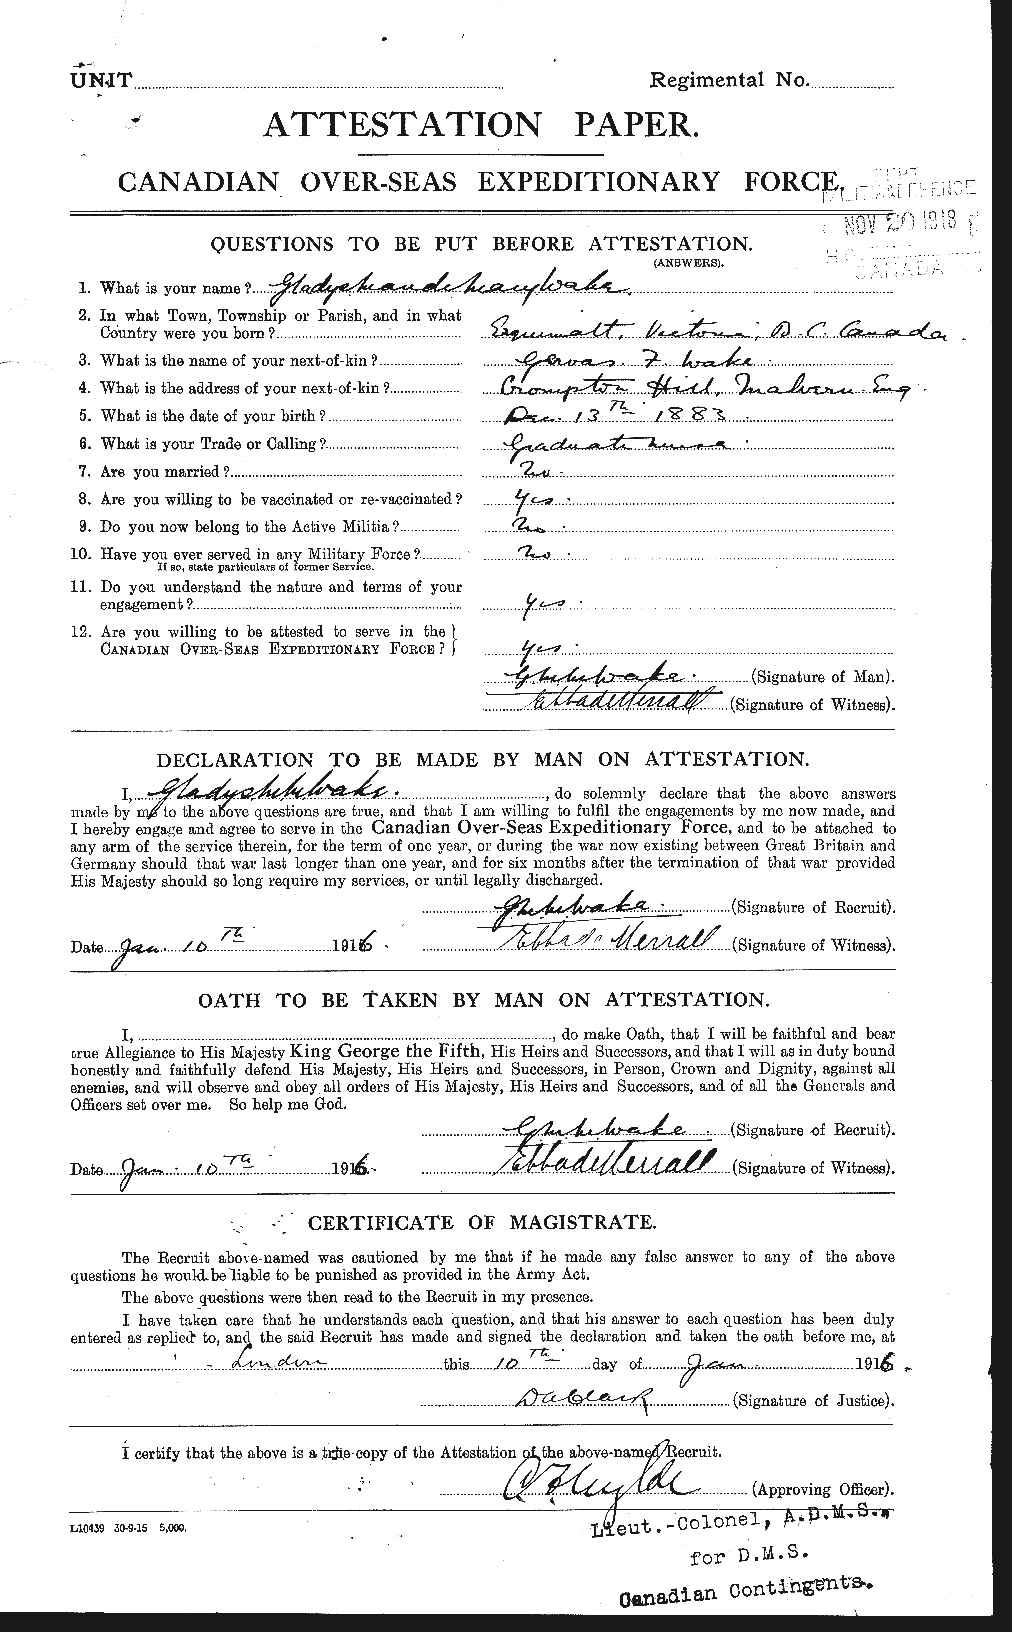 Personnel Records of the First World War - CEF 237315a